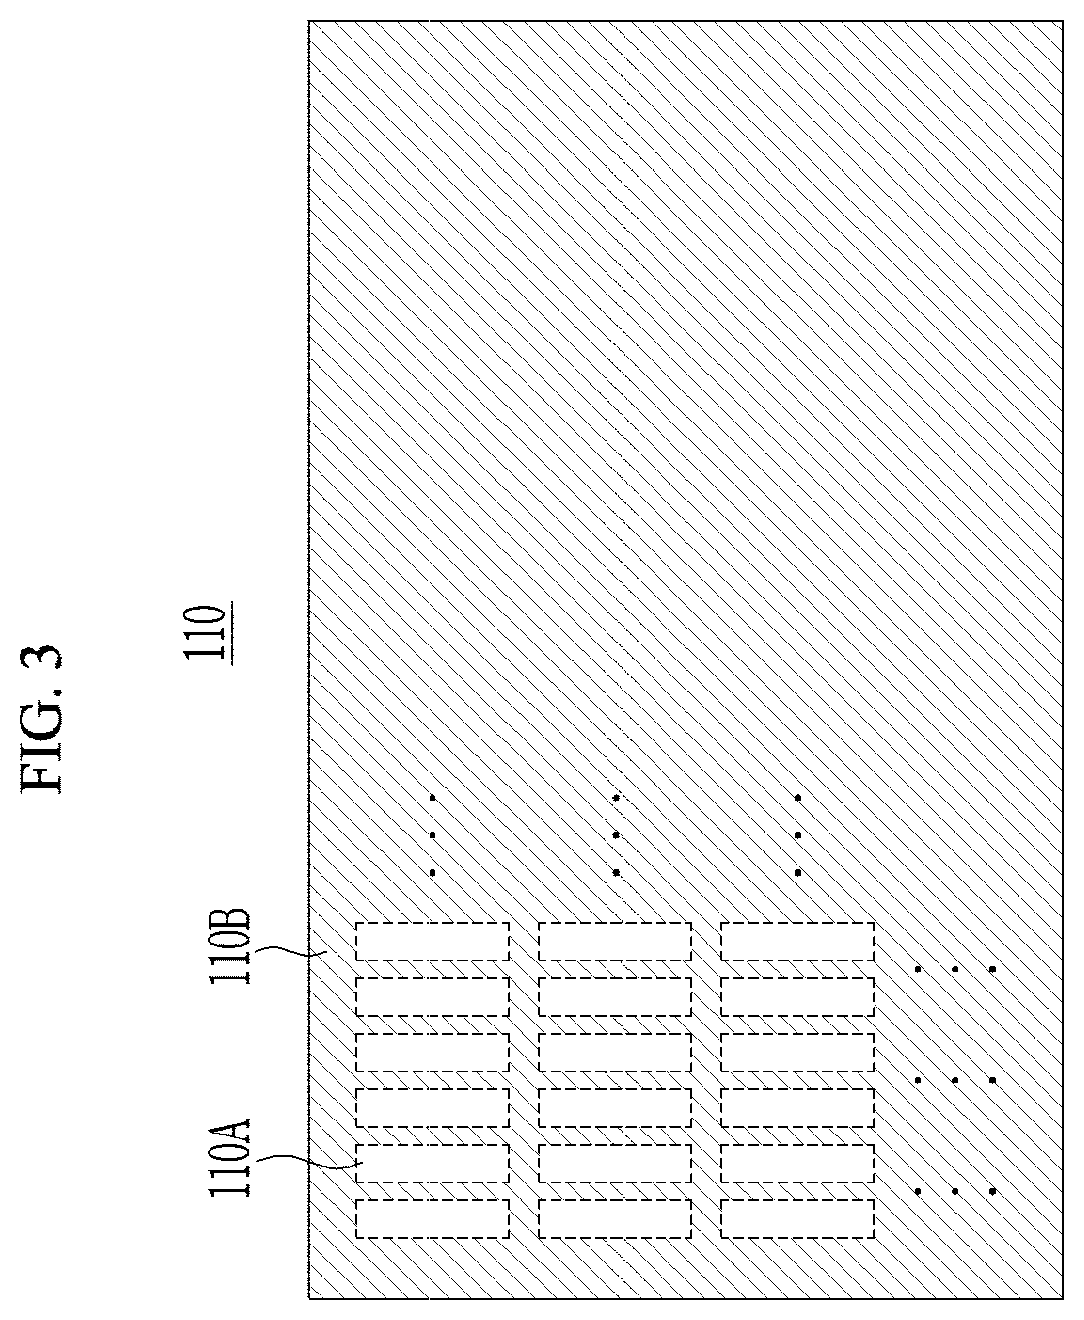 Stretchable devices, display panels, sensors, and electronic devices